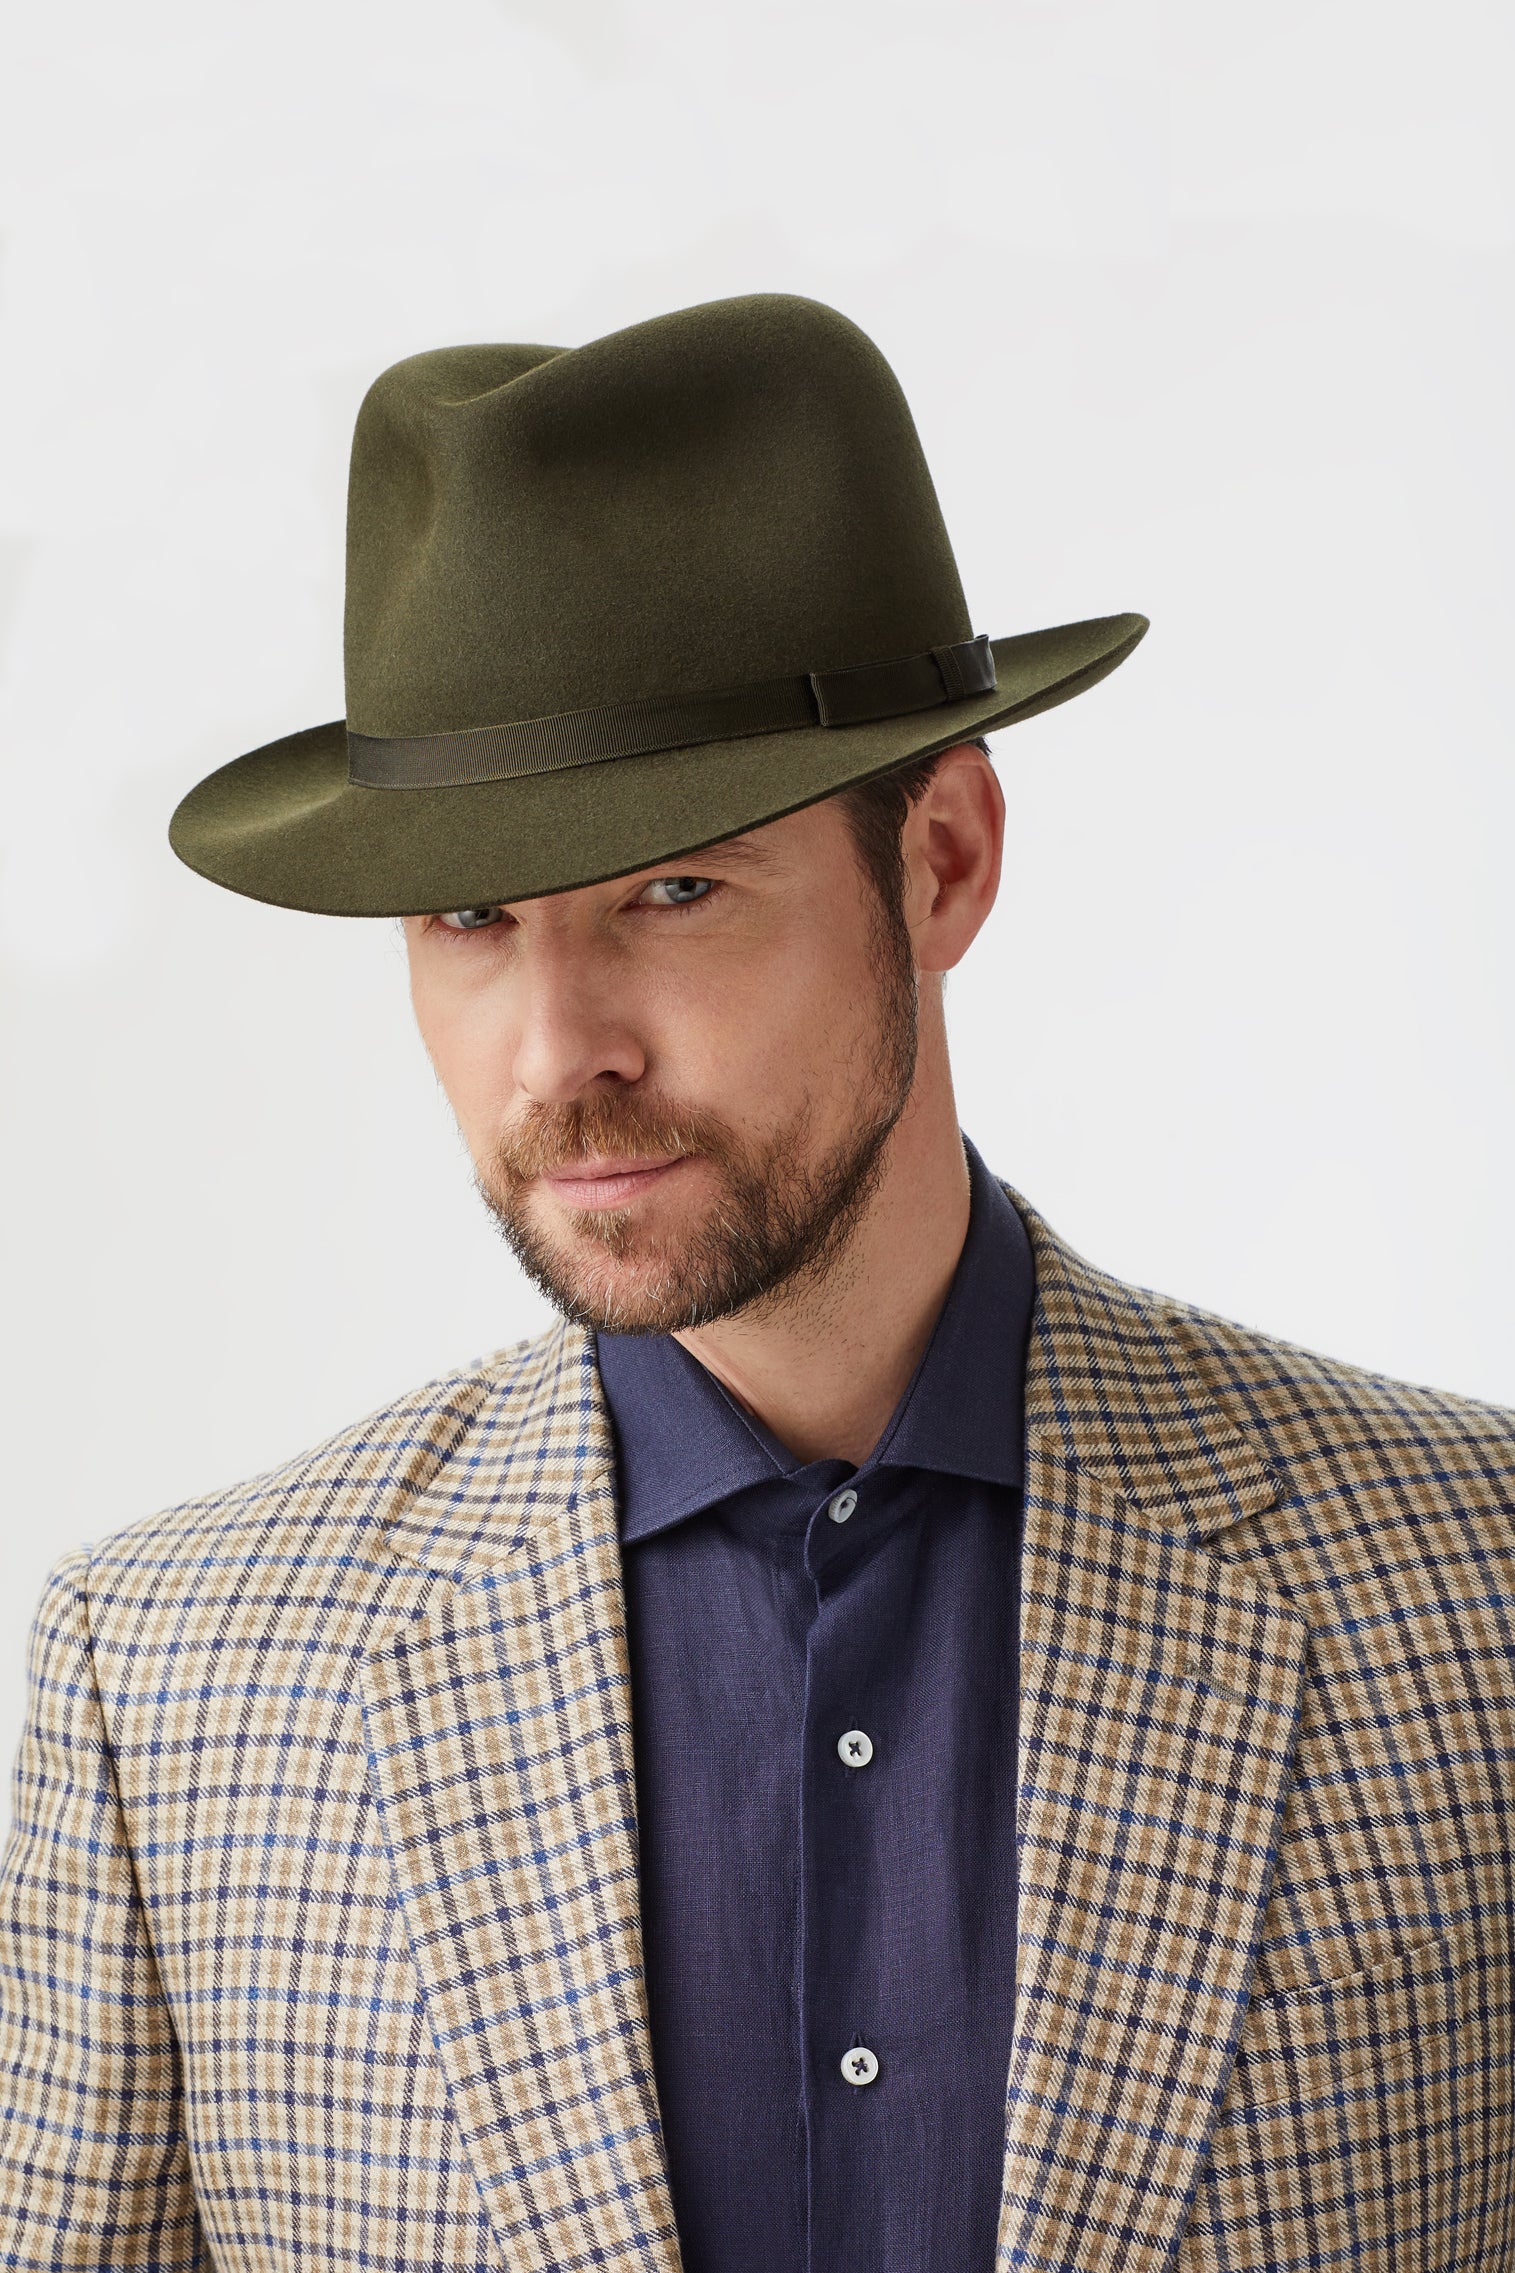 Wetherby Trilby - Men's Trilbies and Porkpies - Lock & Co. Hatters London UK